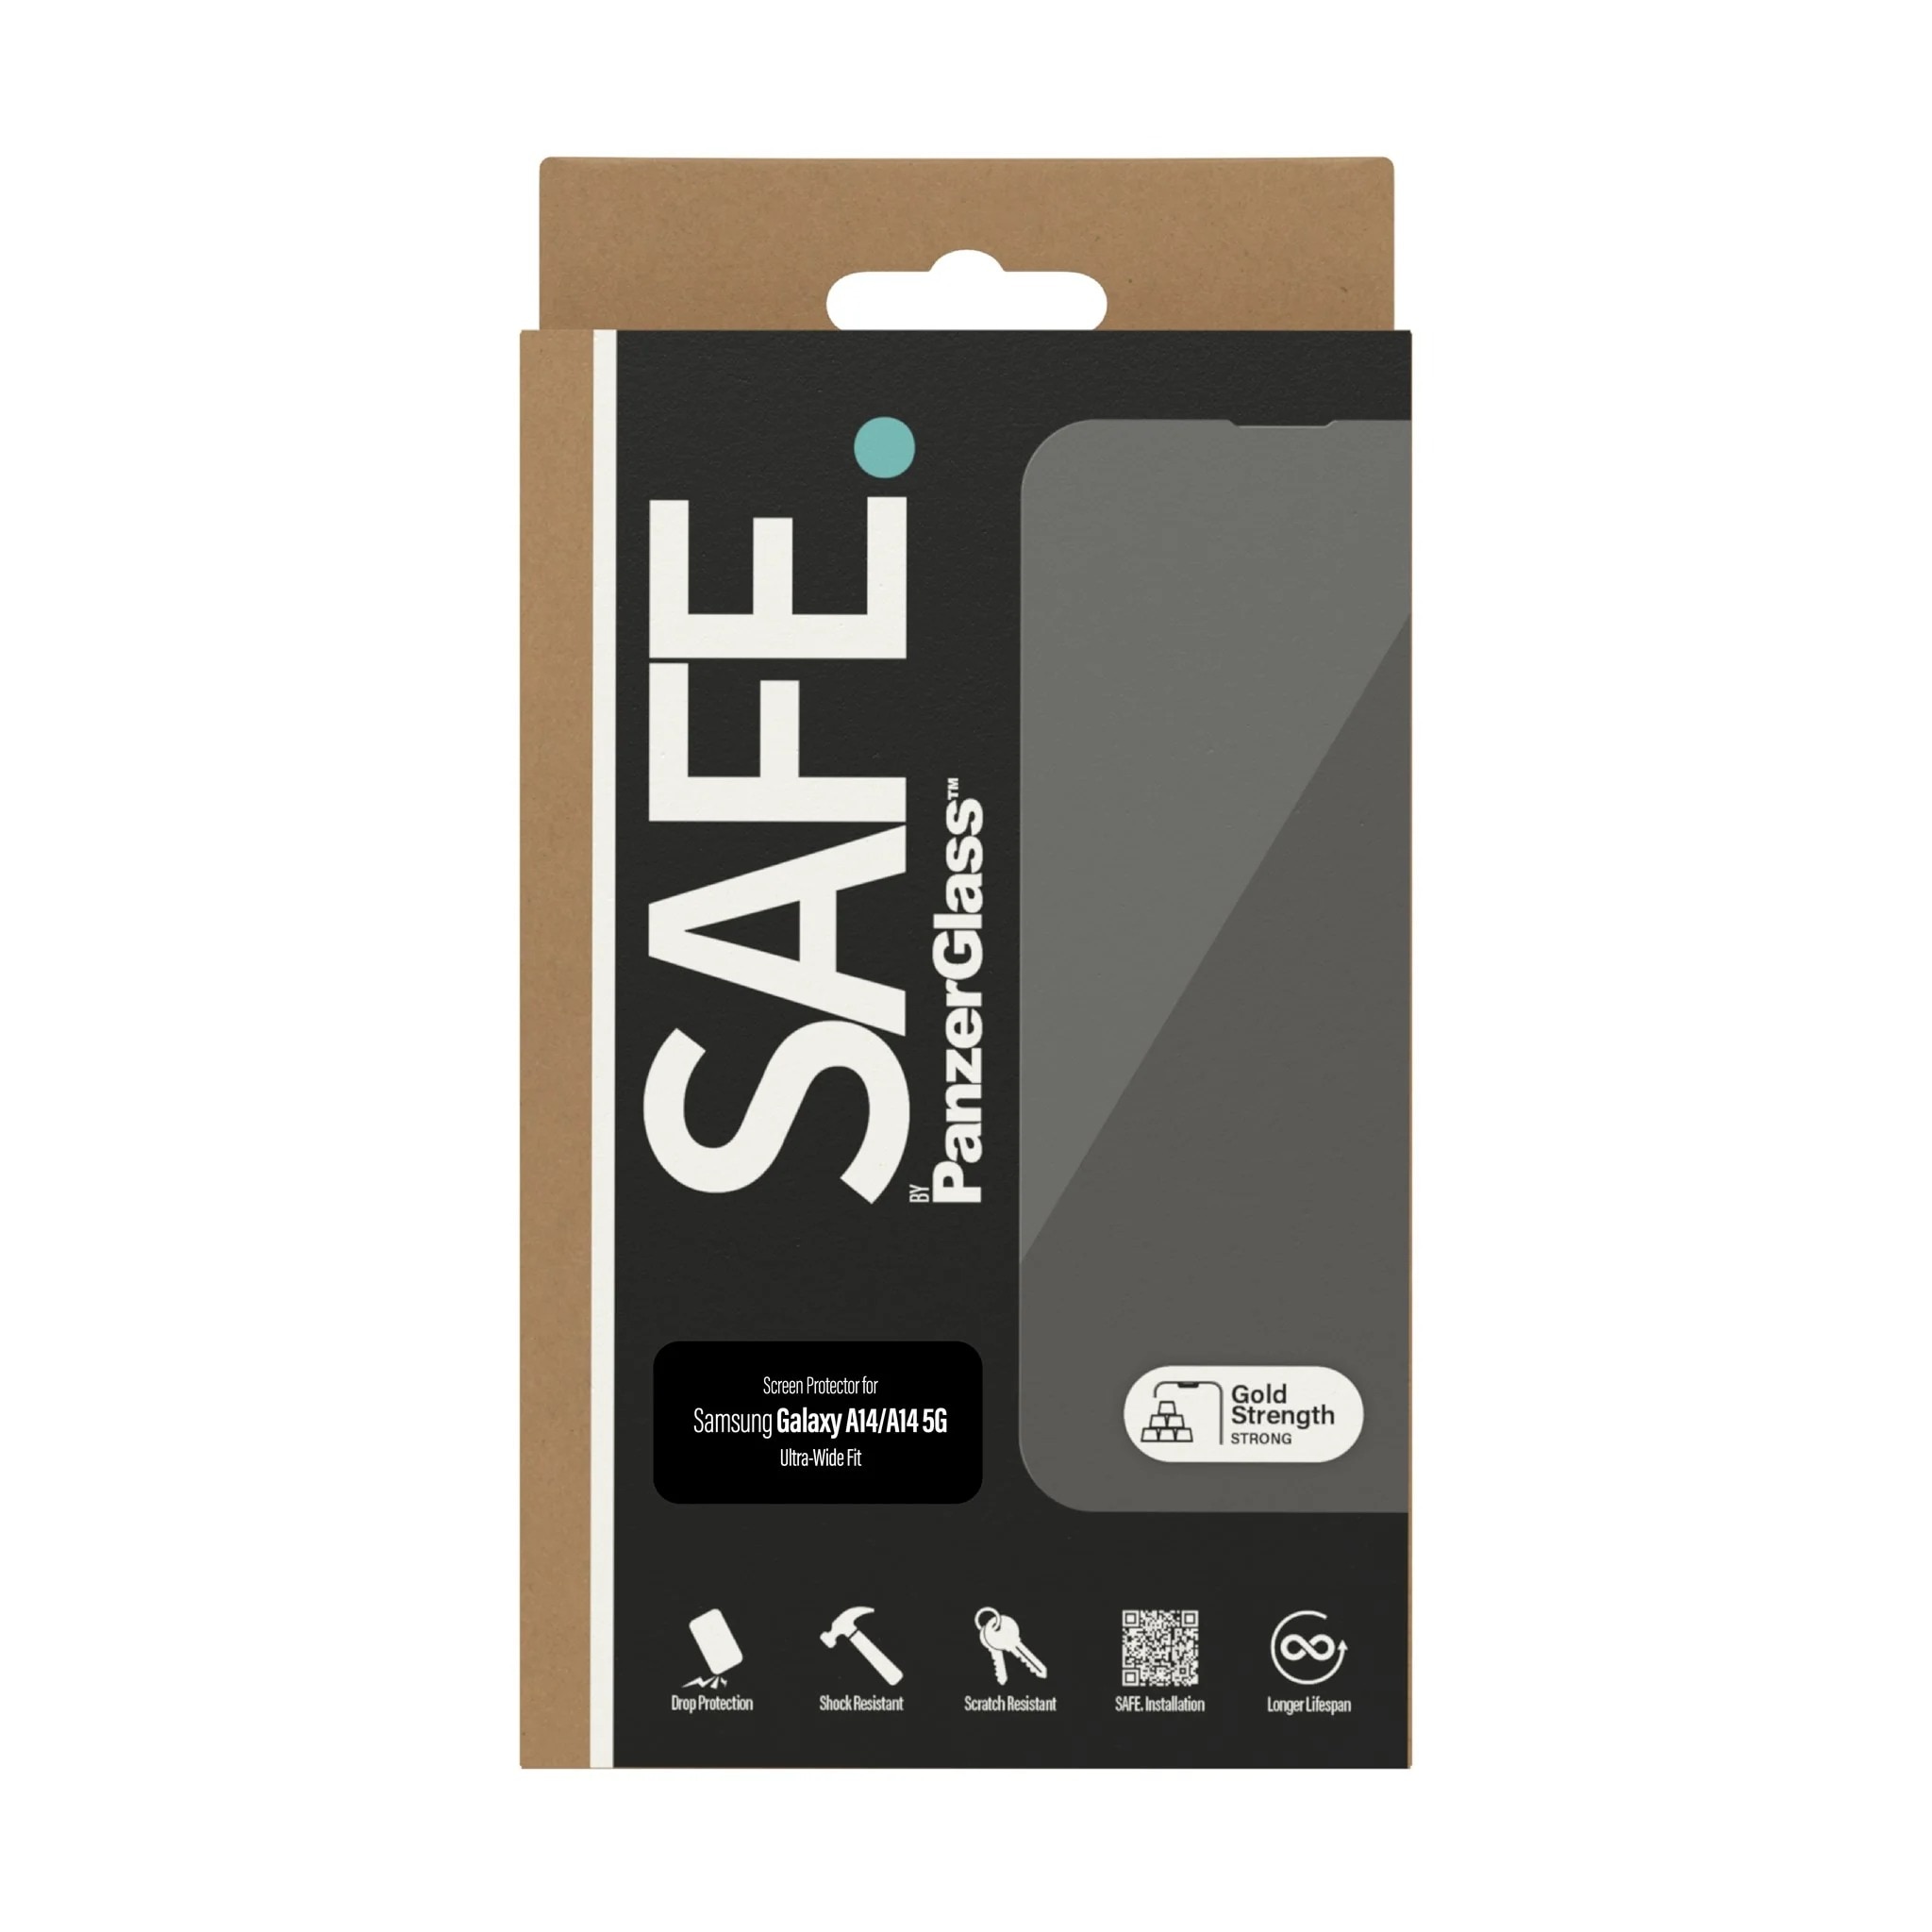 Samsung Galaxy A14 Screen Protector/Skærmbeskyttelse Ultra Wide Fit